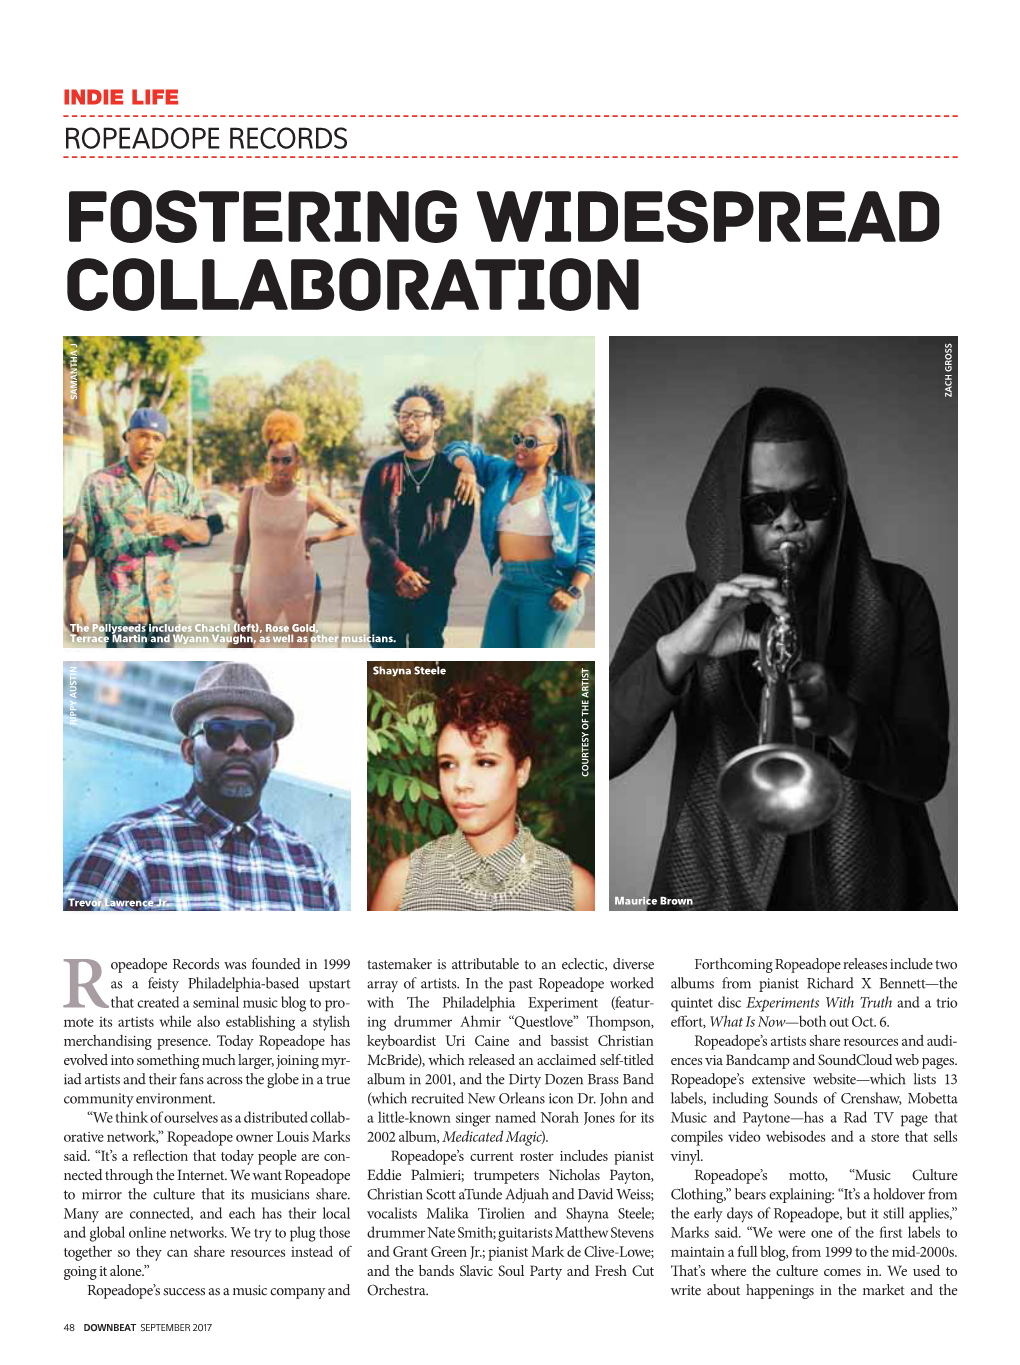 ROPEADOPE RECORDS Fostering Widespread Collaboration ZACH GROSS SAMANTHA J